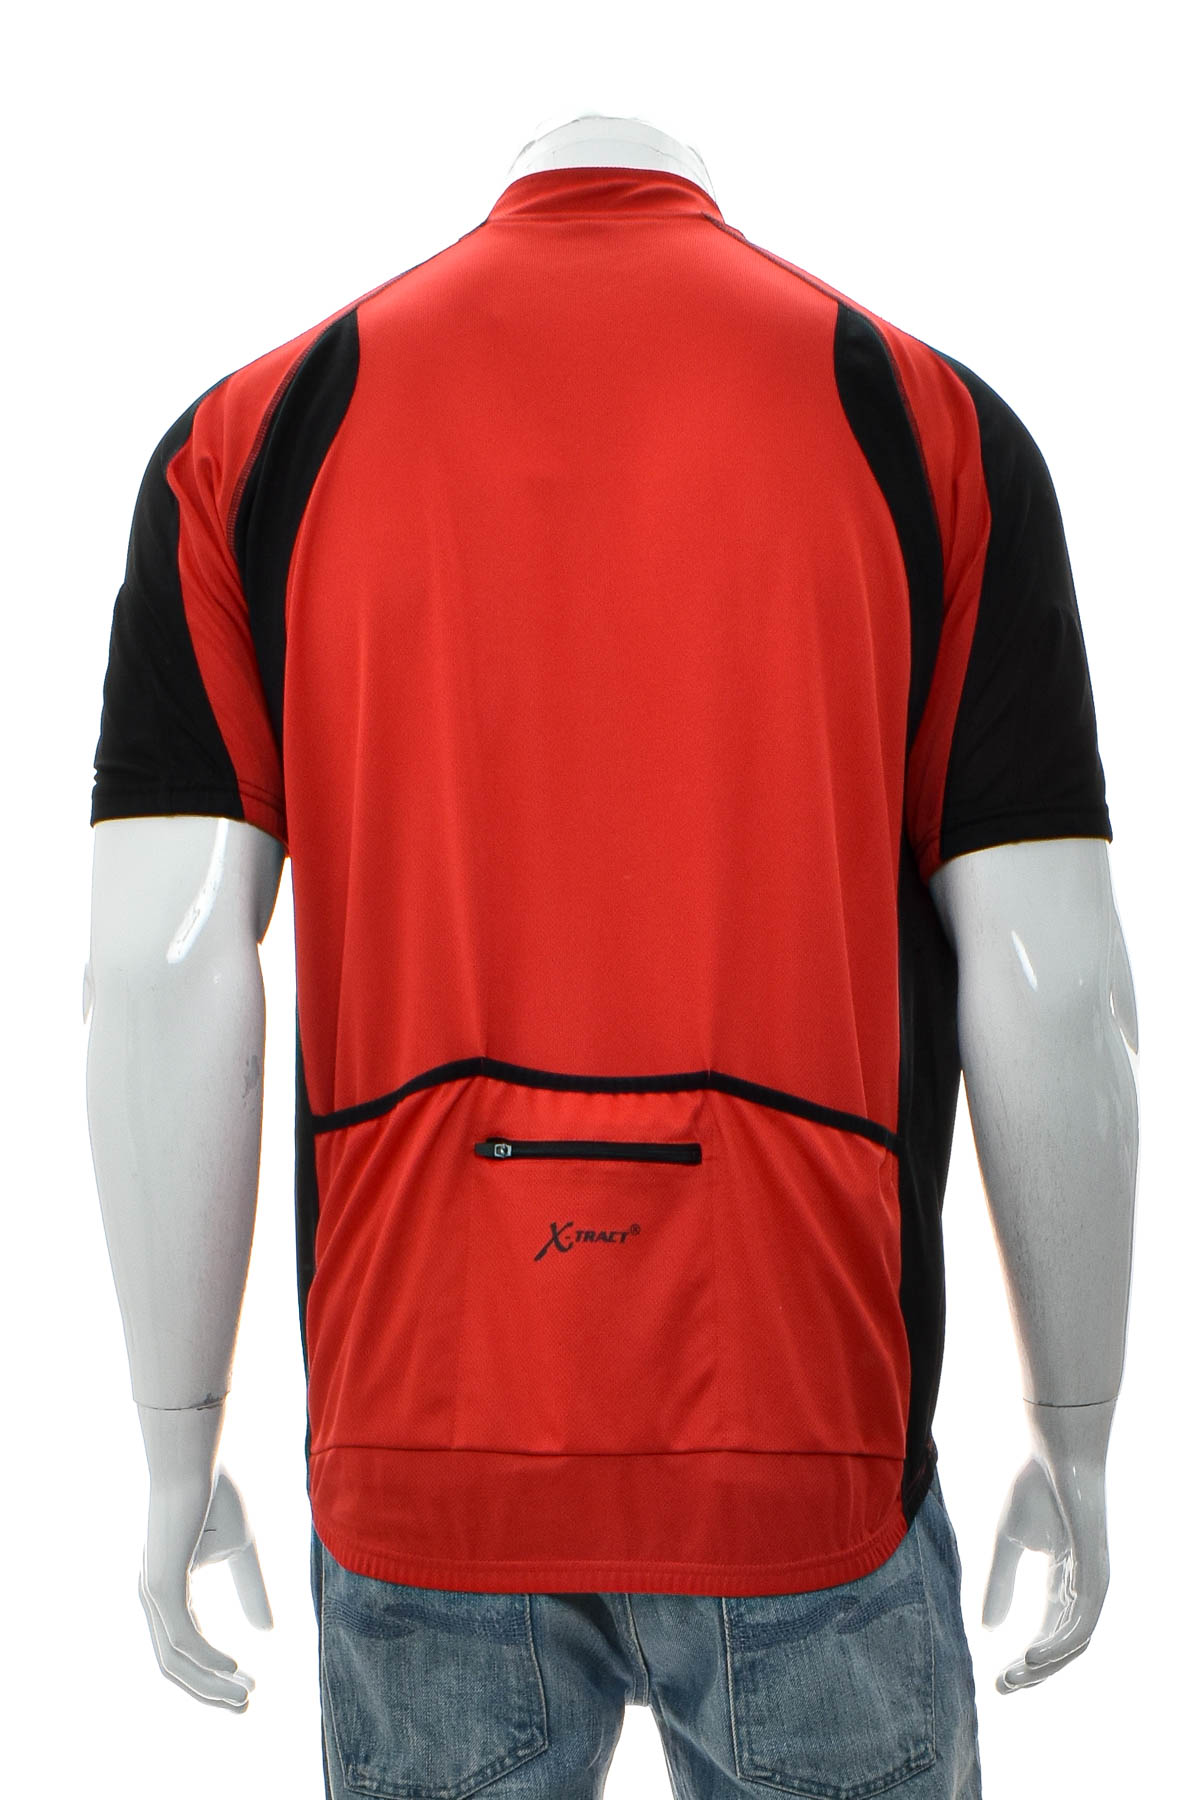 Men's T-shirt for cycling - Xtract - 1